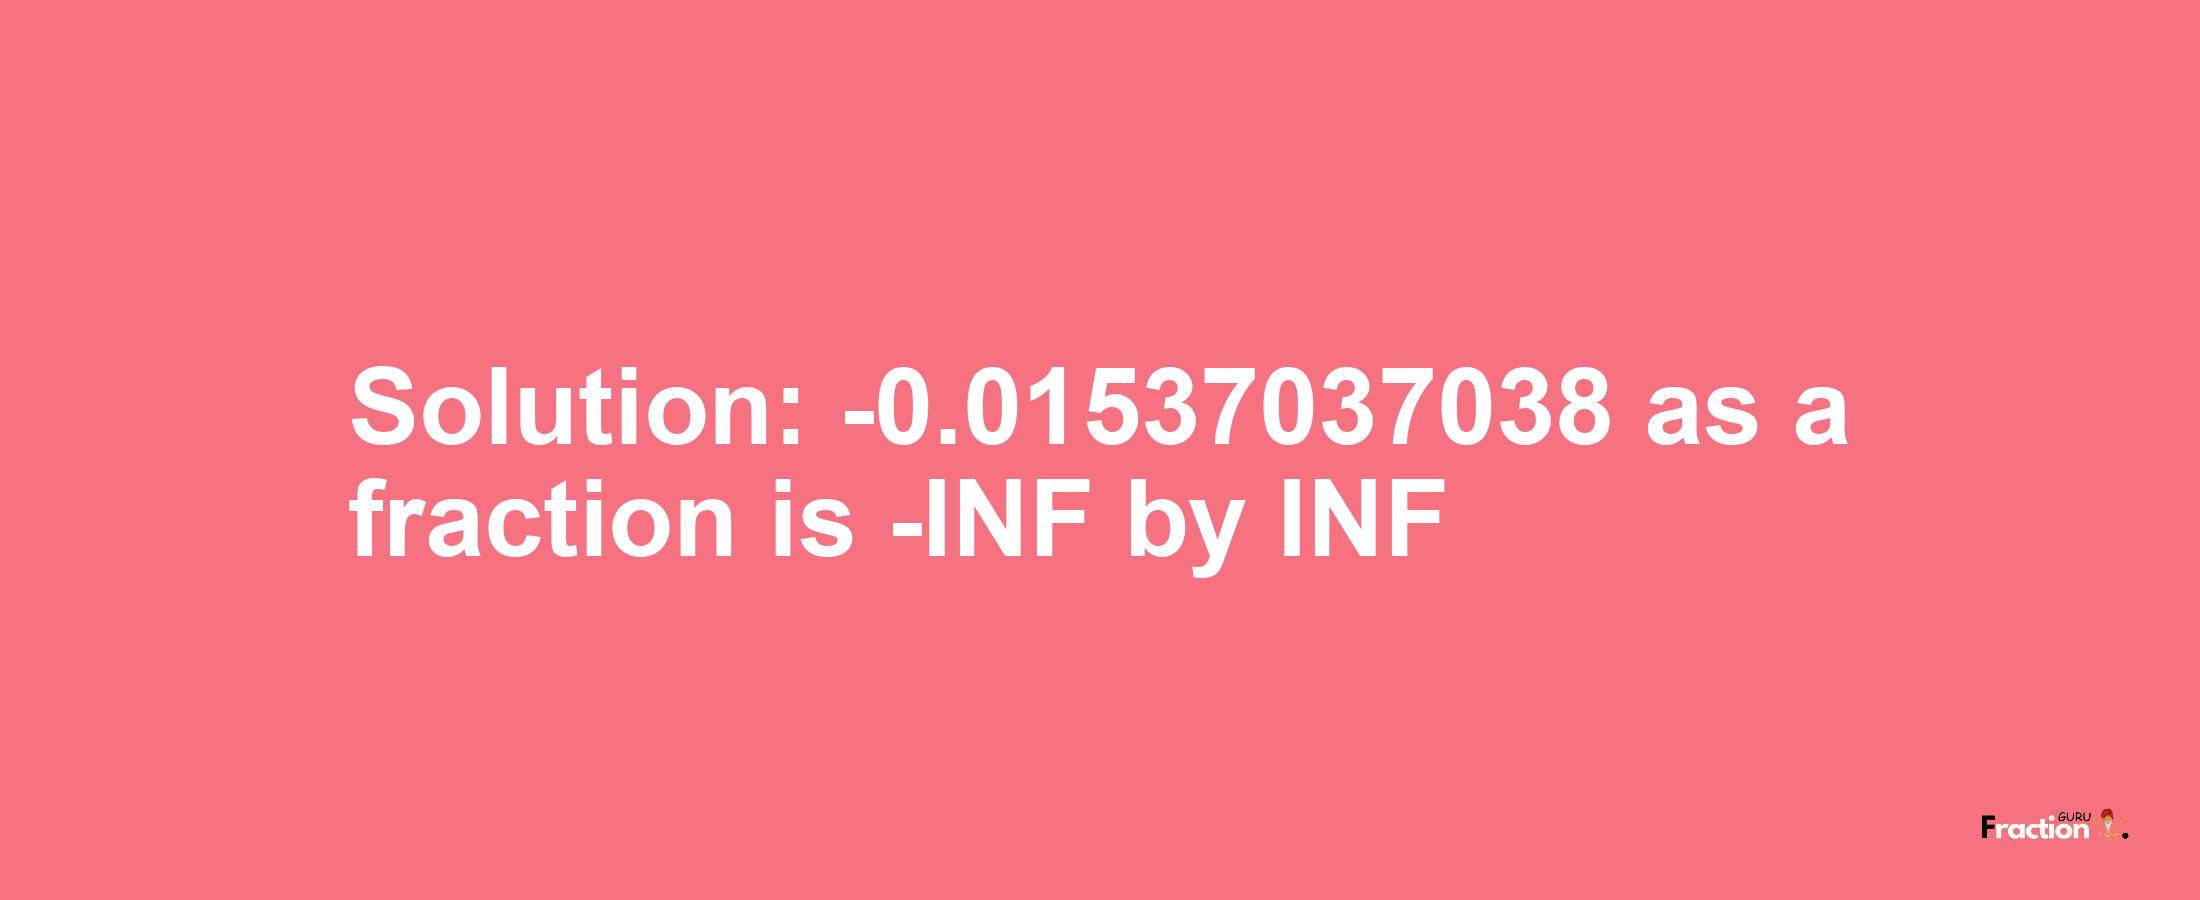 Solution:-0.01537037038 as a fraction is -INF/INF